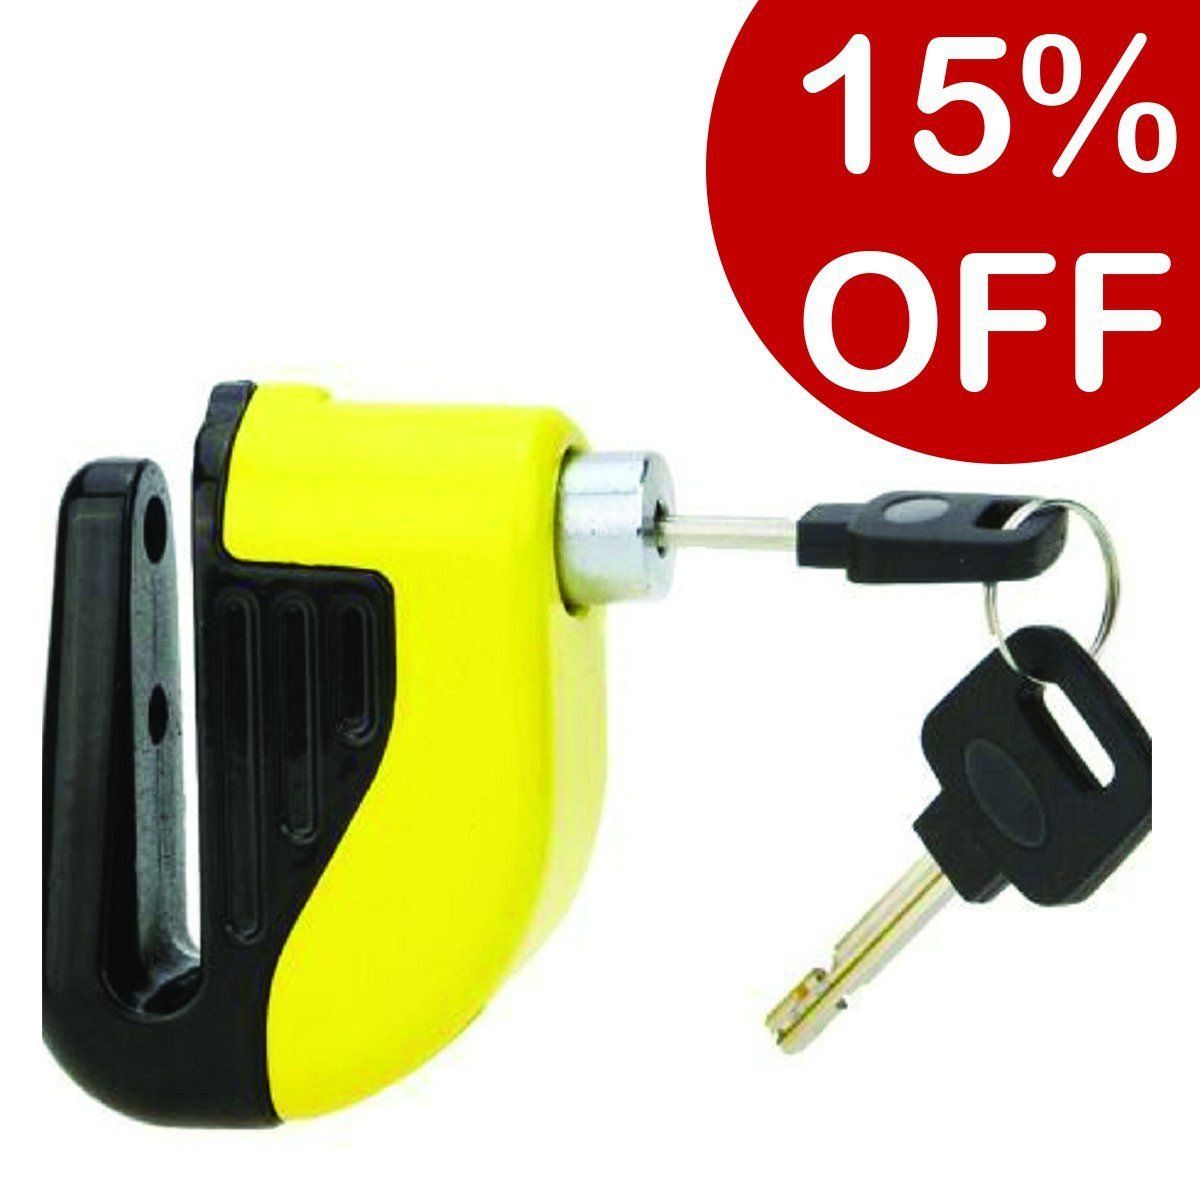 A Motorcycle Alarm Disc Lock with a key attached to it.